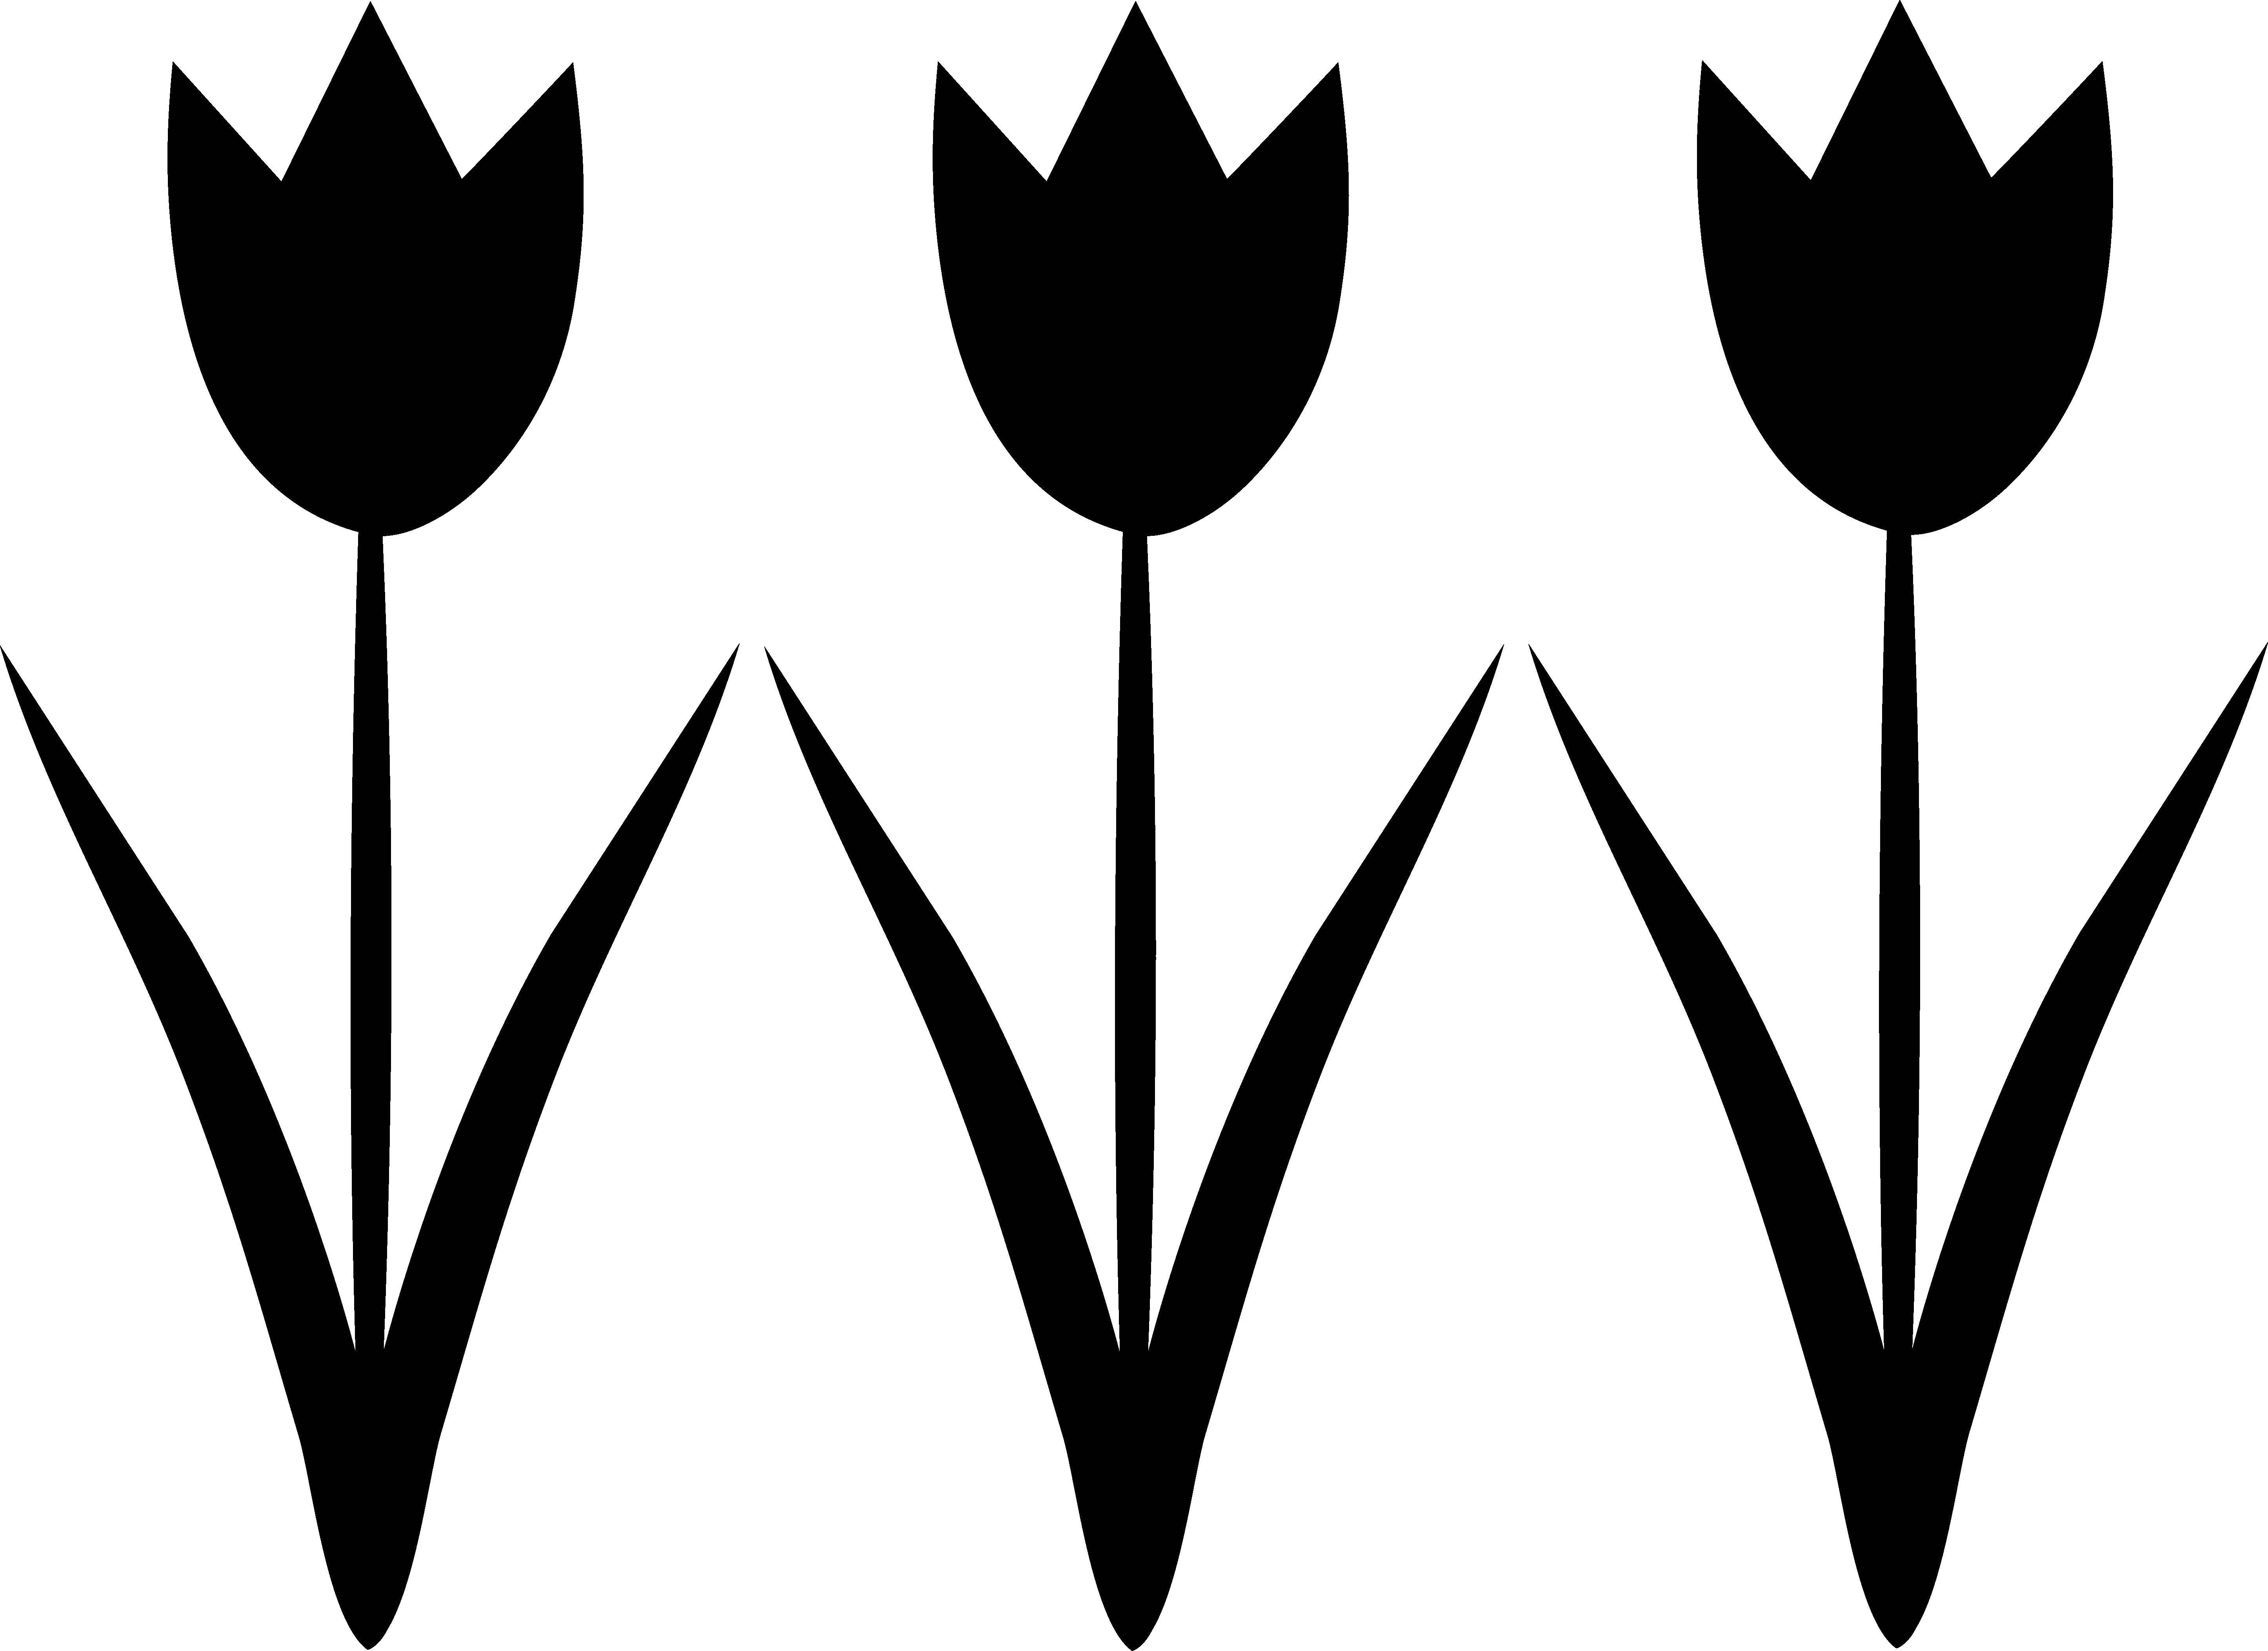 Coloring Three tulips. Category The contours of the flower to cut. Tags:  contour, flowers, petals.